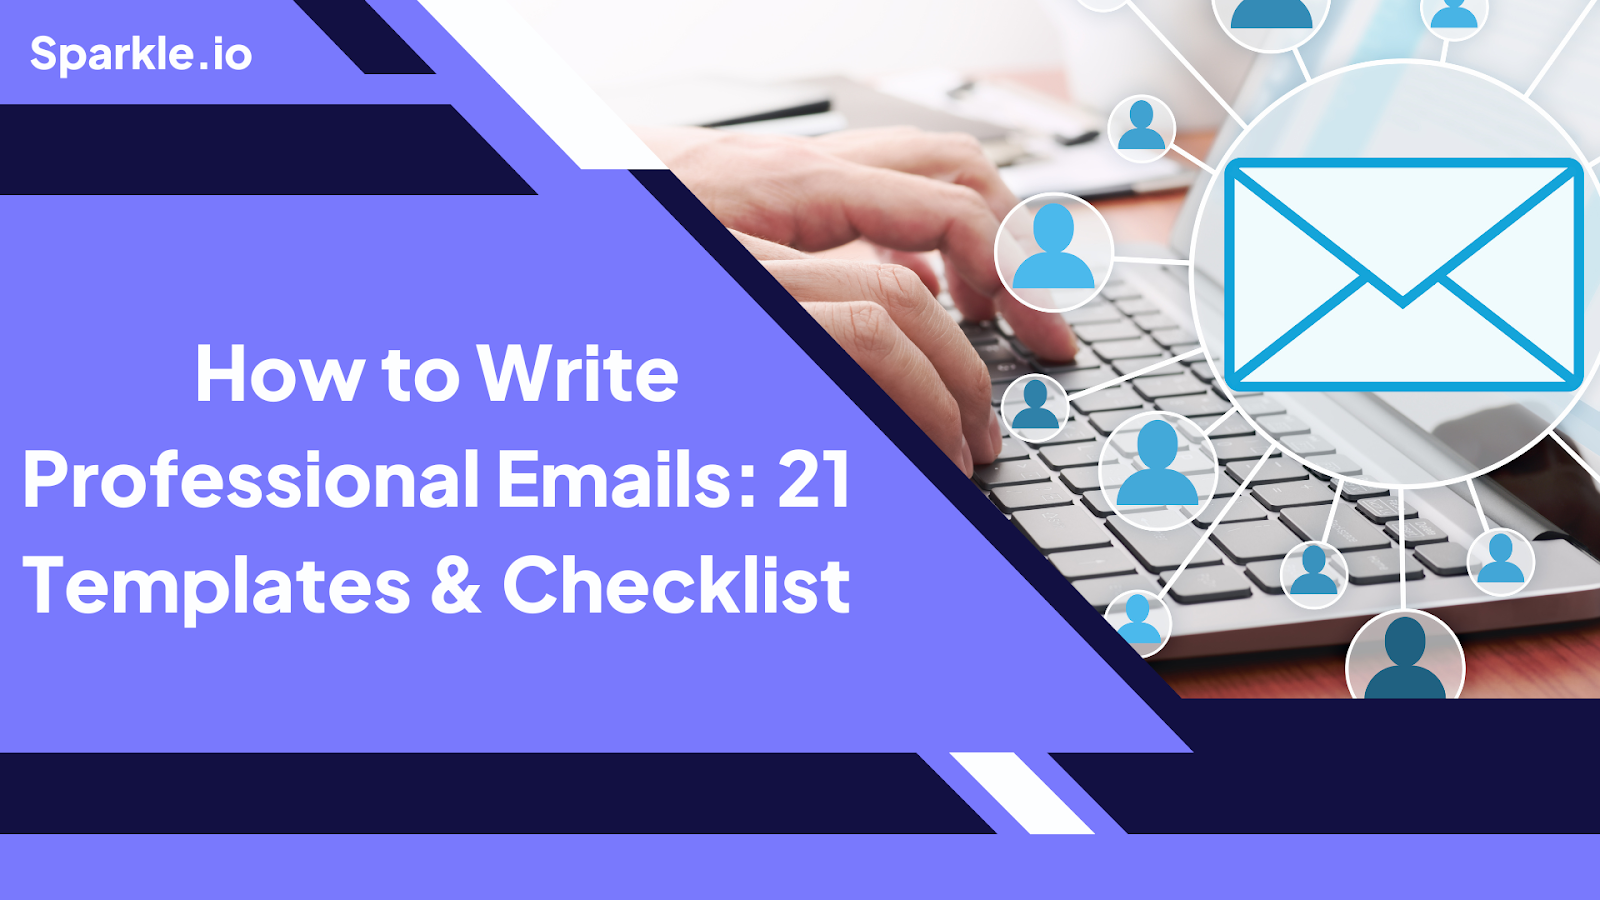 How to Write Professional Emails: 21 Templates & Checklist